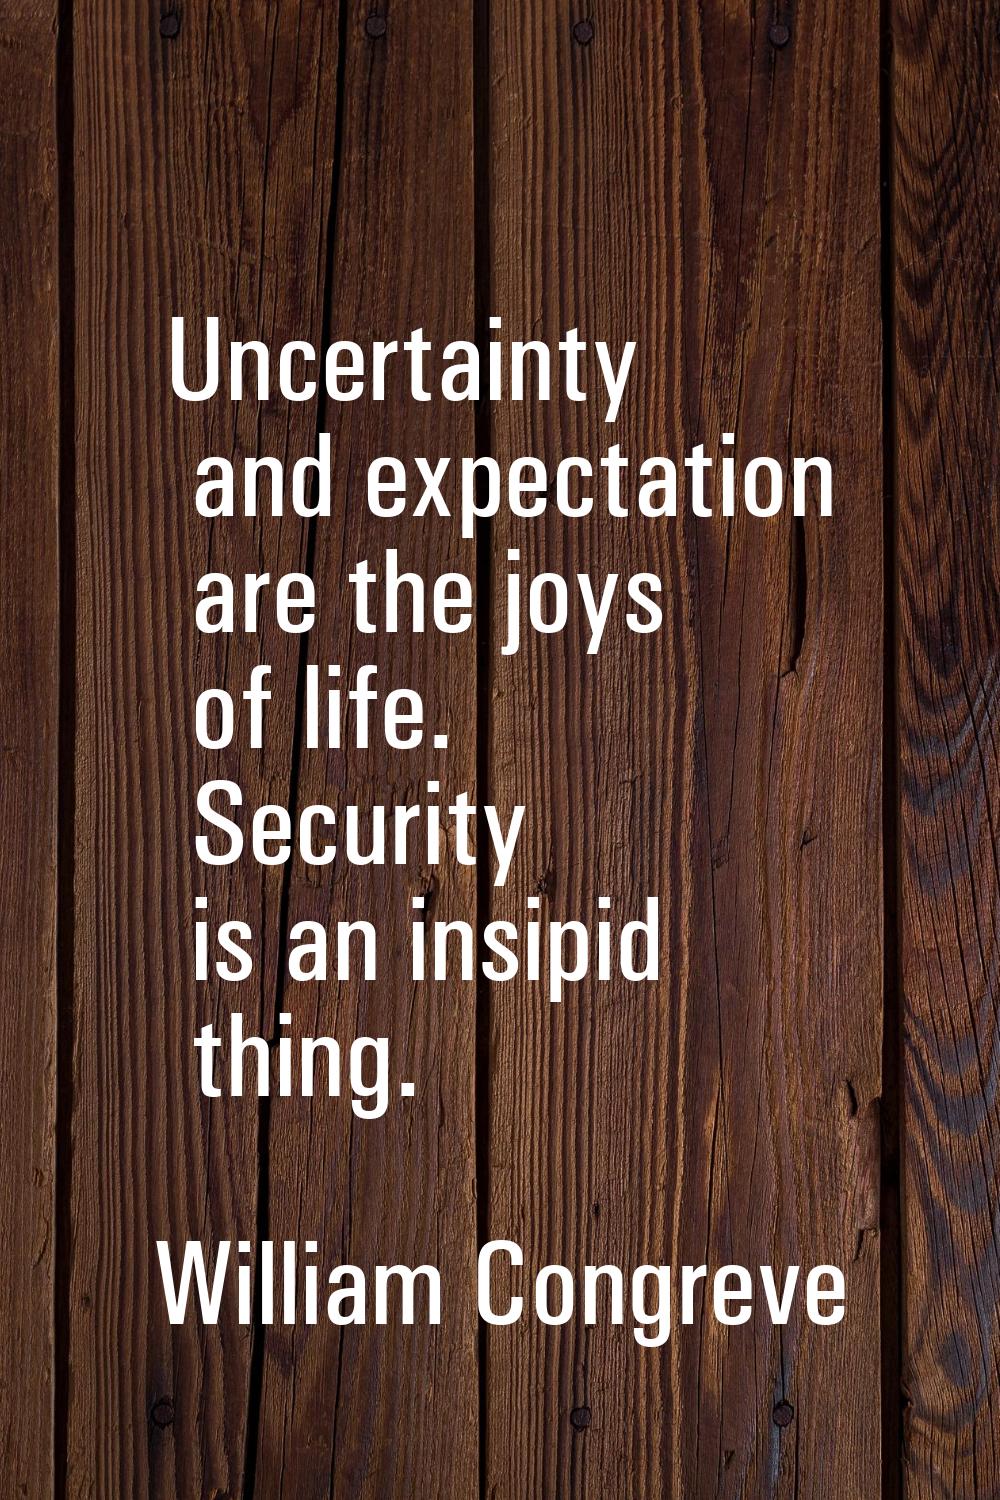 Uncertainty and expectation are the joys of life. Security is an insipid thing.